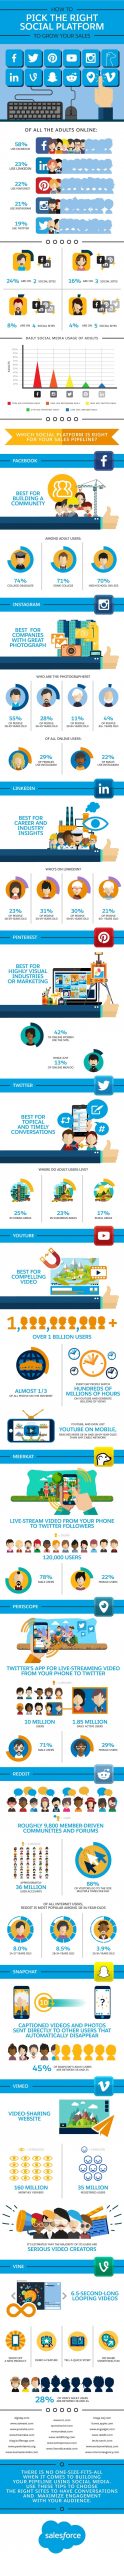 160607 the perfect social platform for your business infographic preview 1 scaled